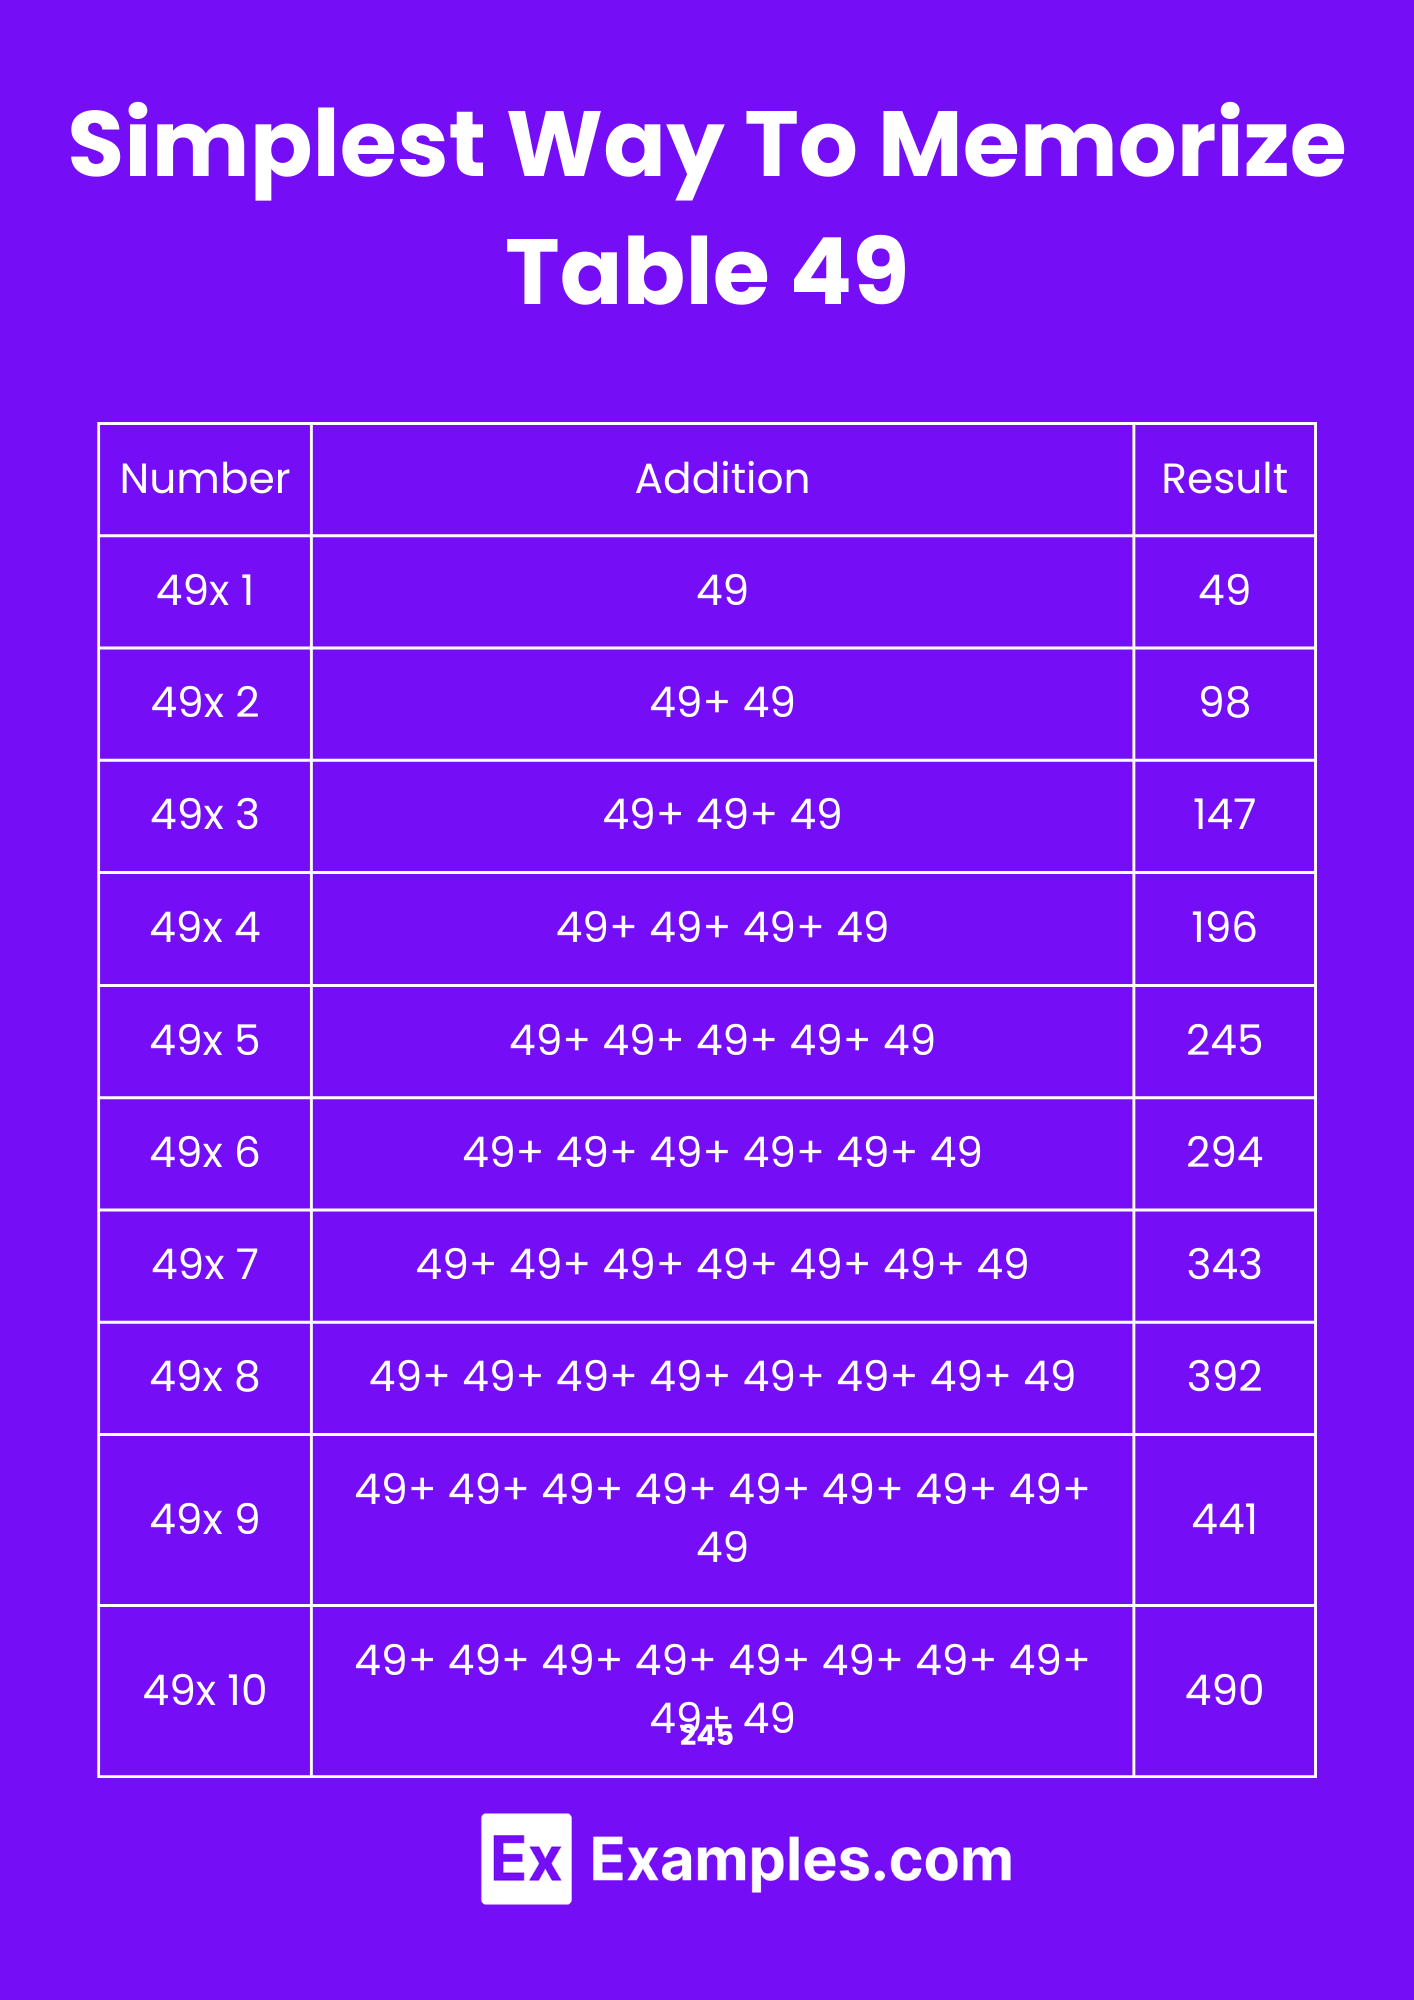 Simplest Way To Memorize Table 49 (1)